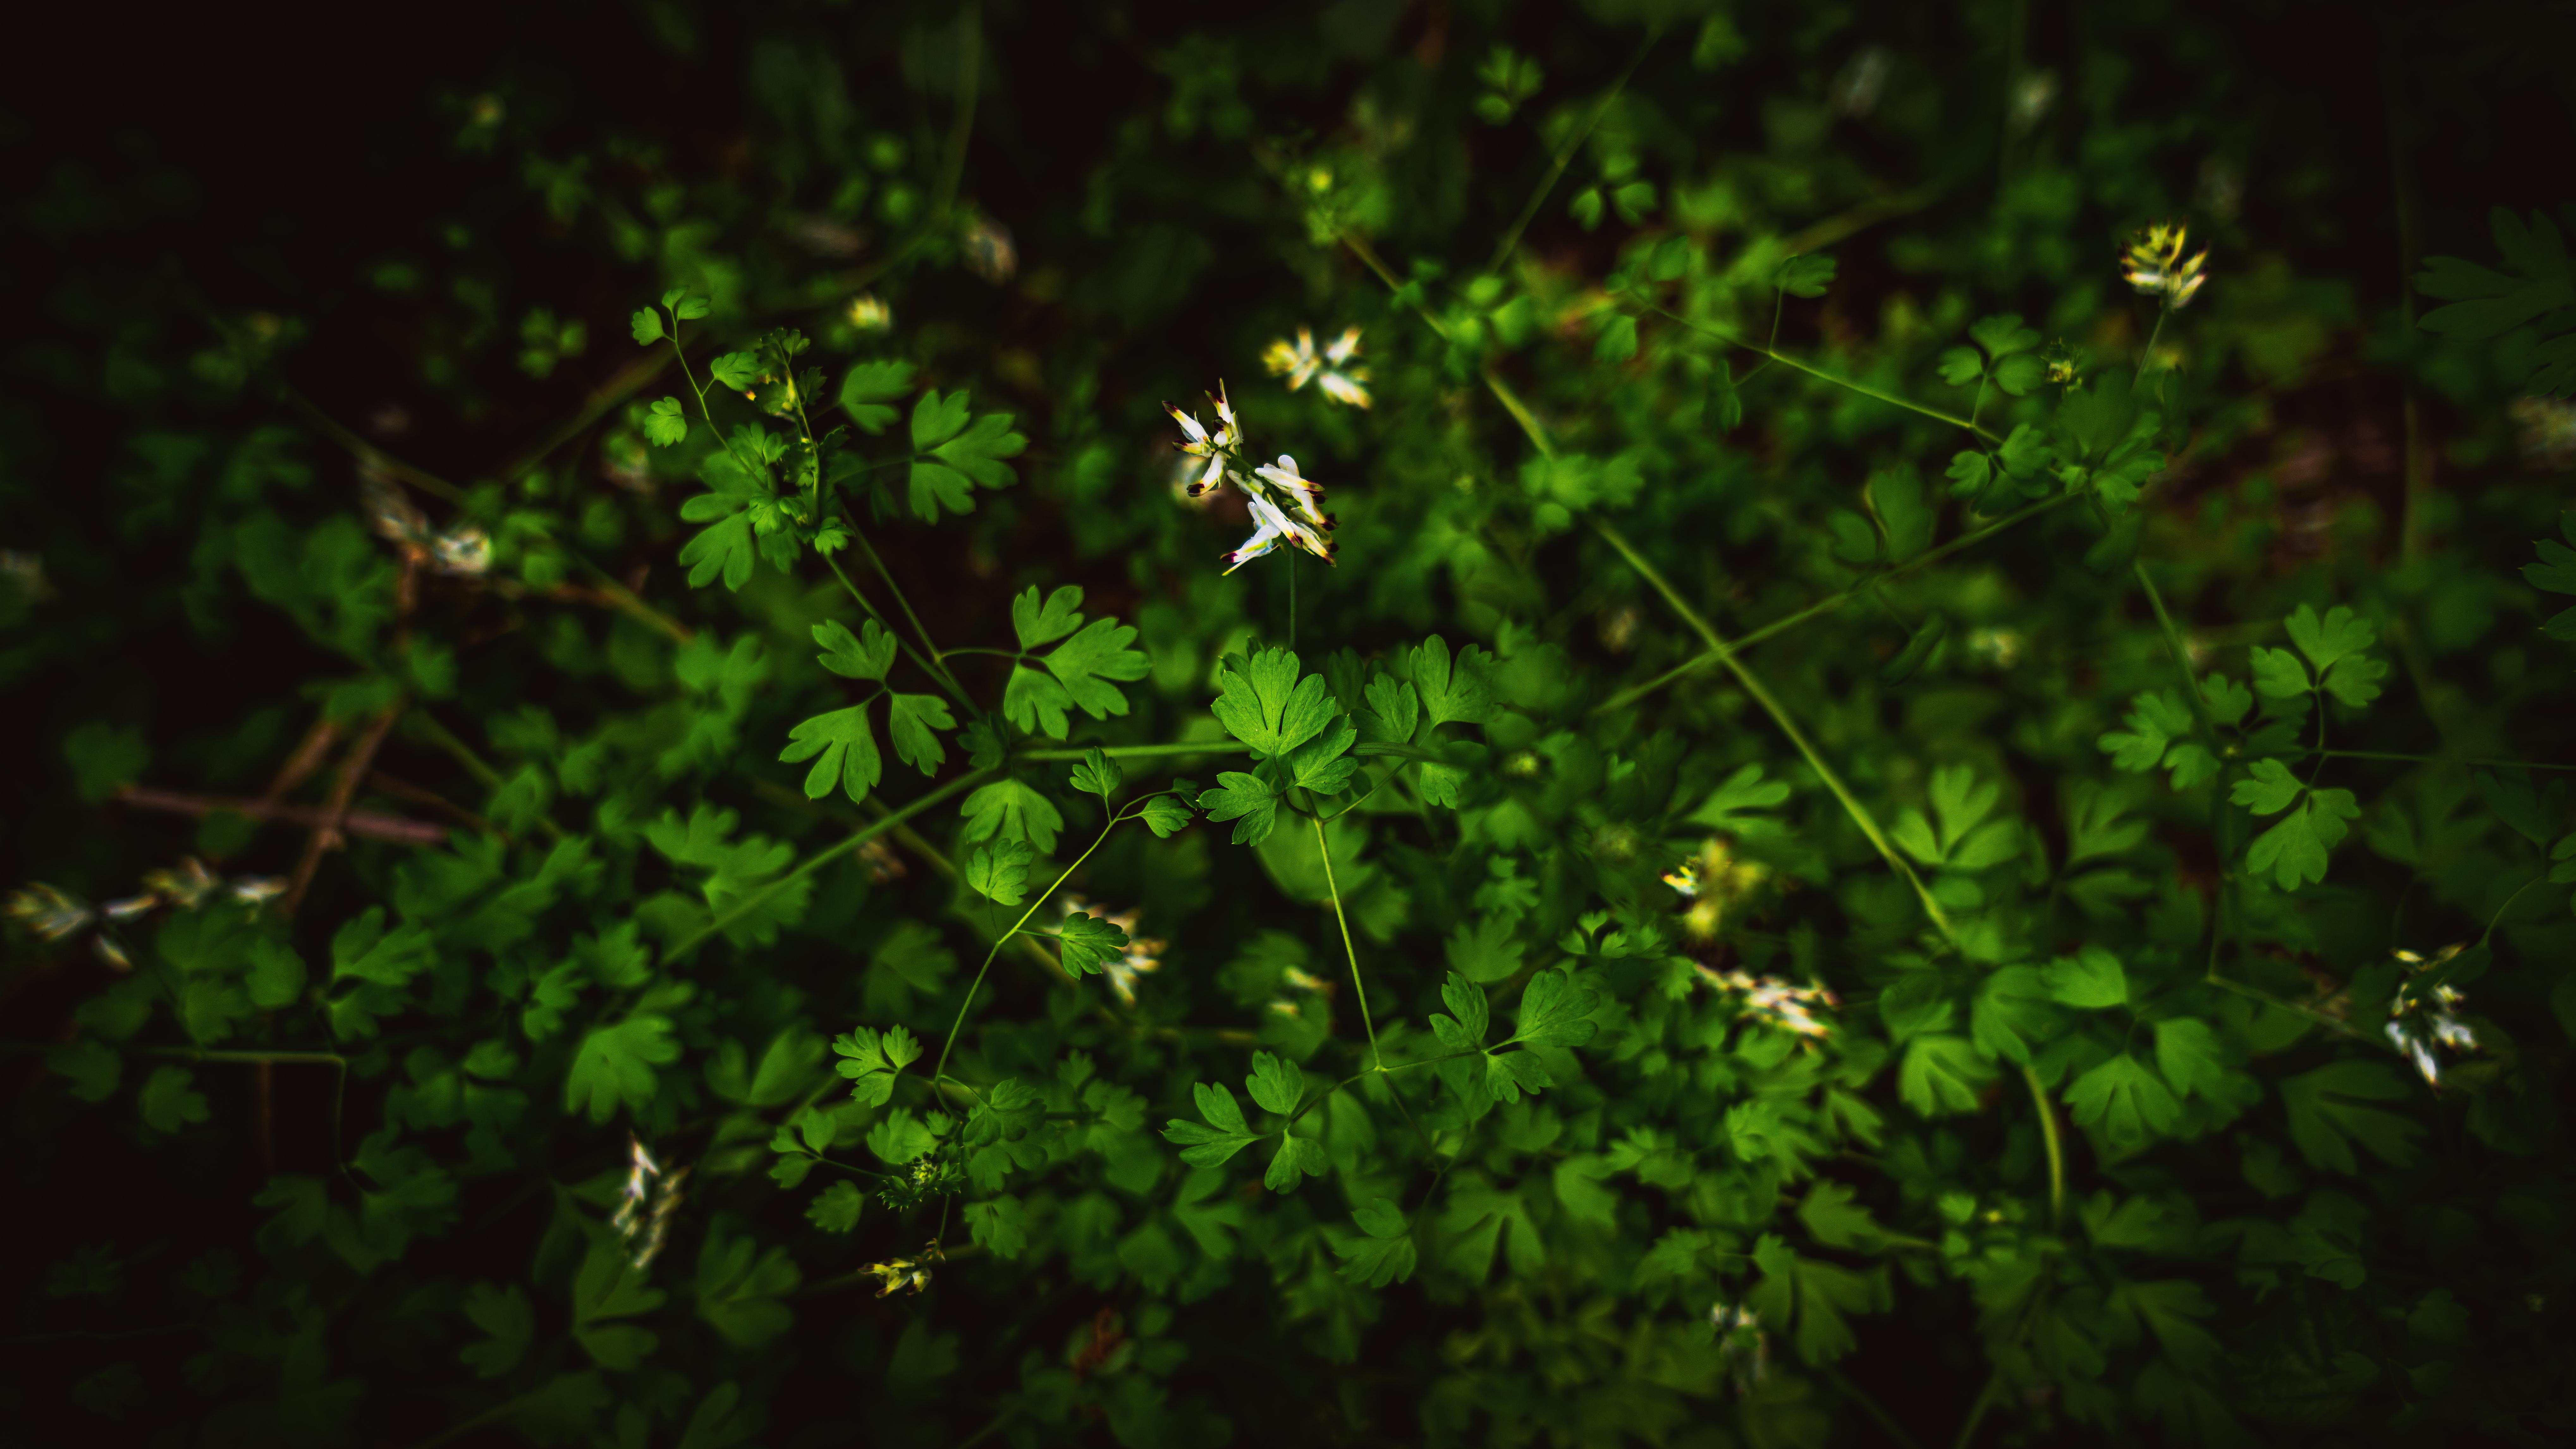 Green 4K wallpaper for your desktop or mobile screen free and easy to download